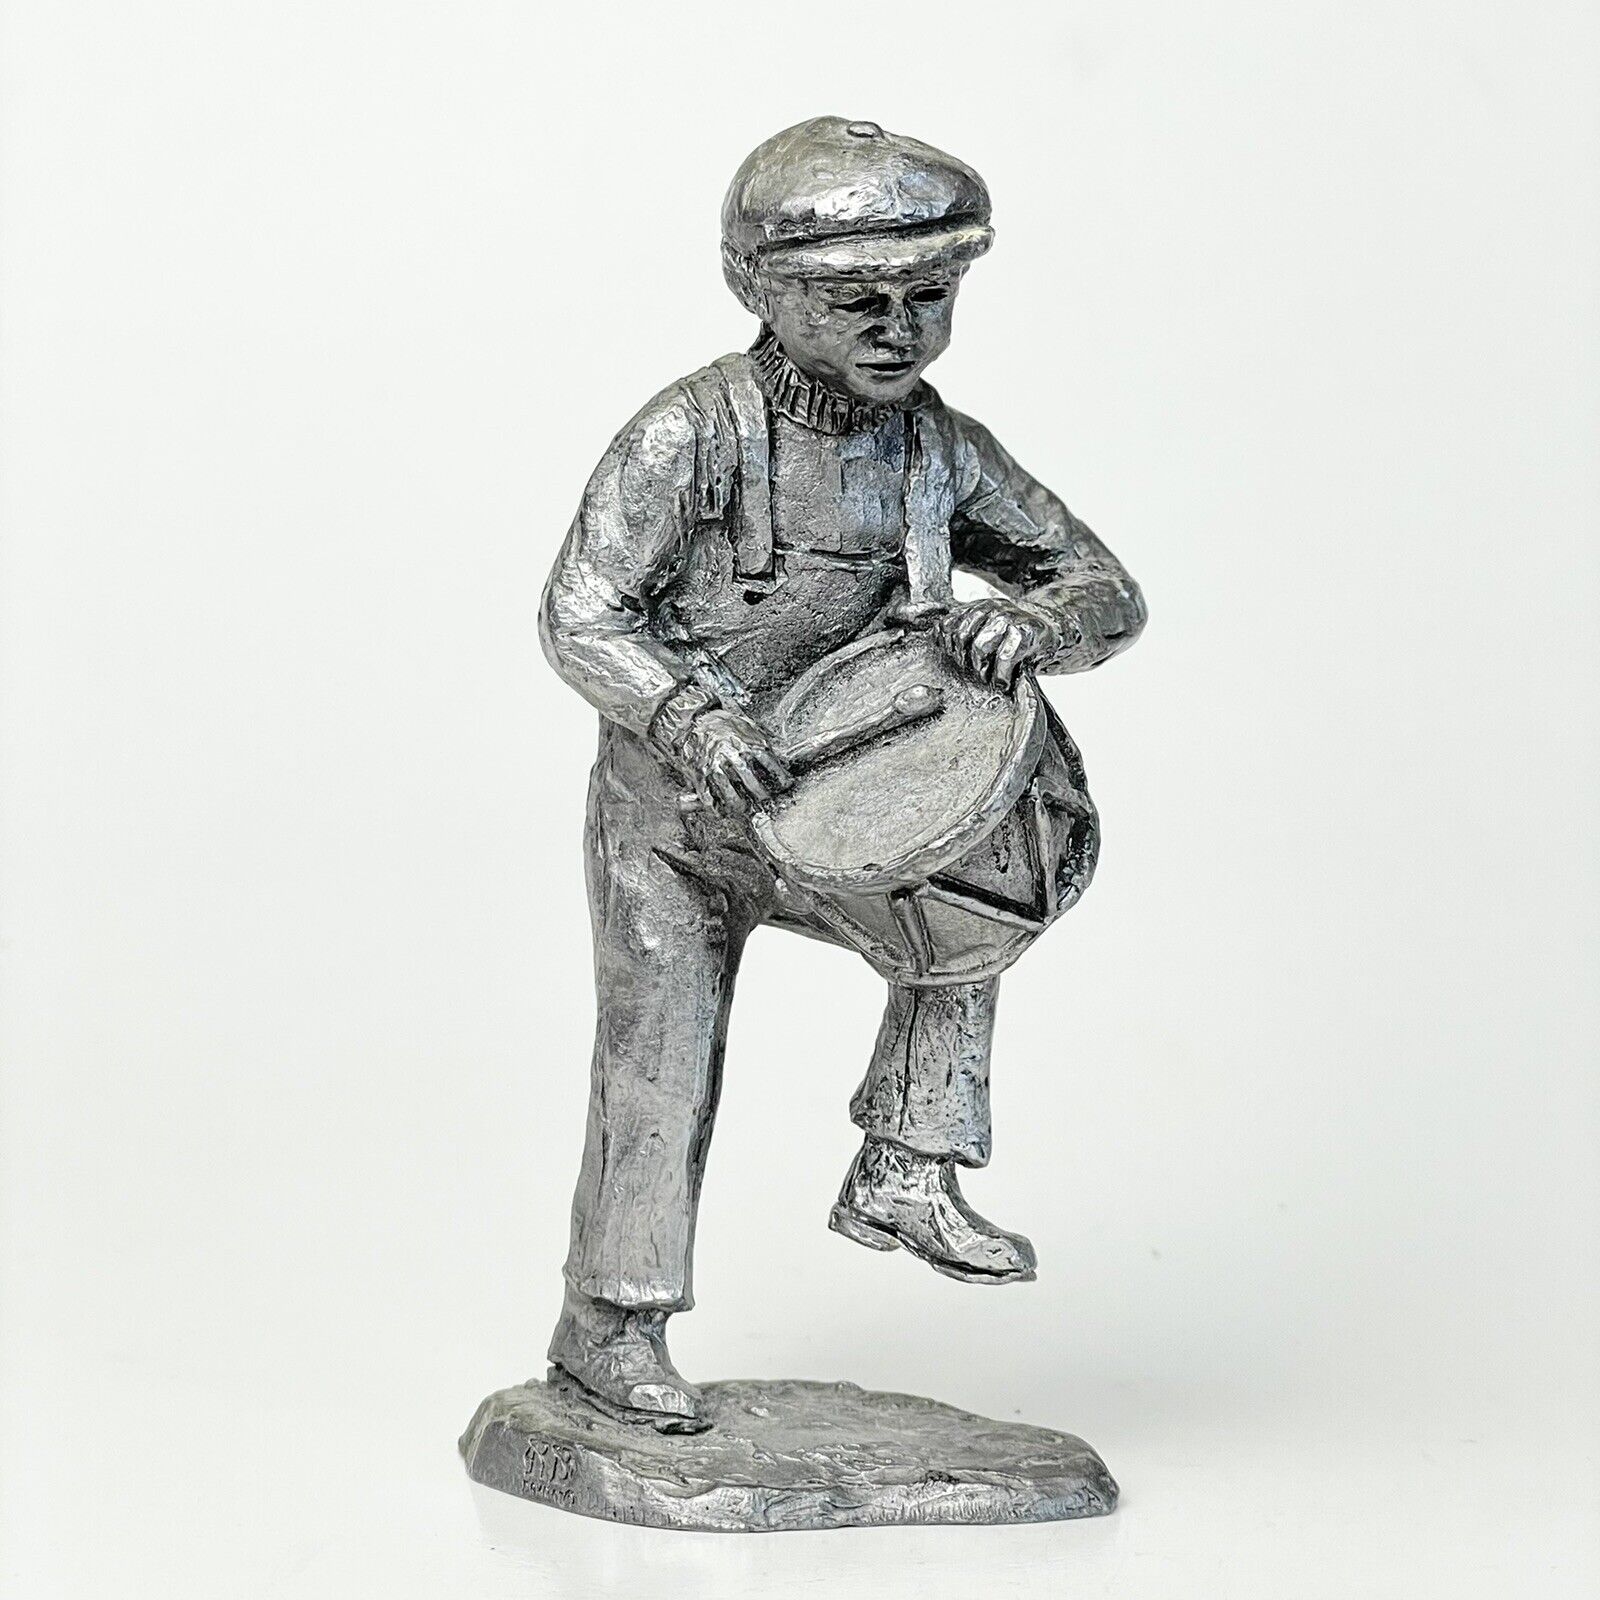 1980s’ Boy Playing Drum 4” Michael Ricker Pewter Figurine - Signed Rare Vintage 